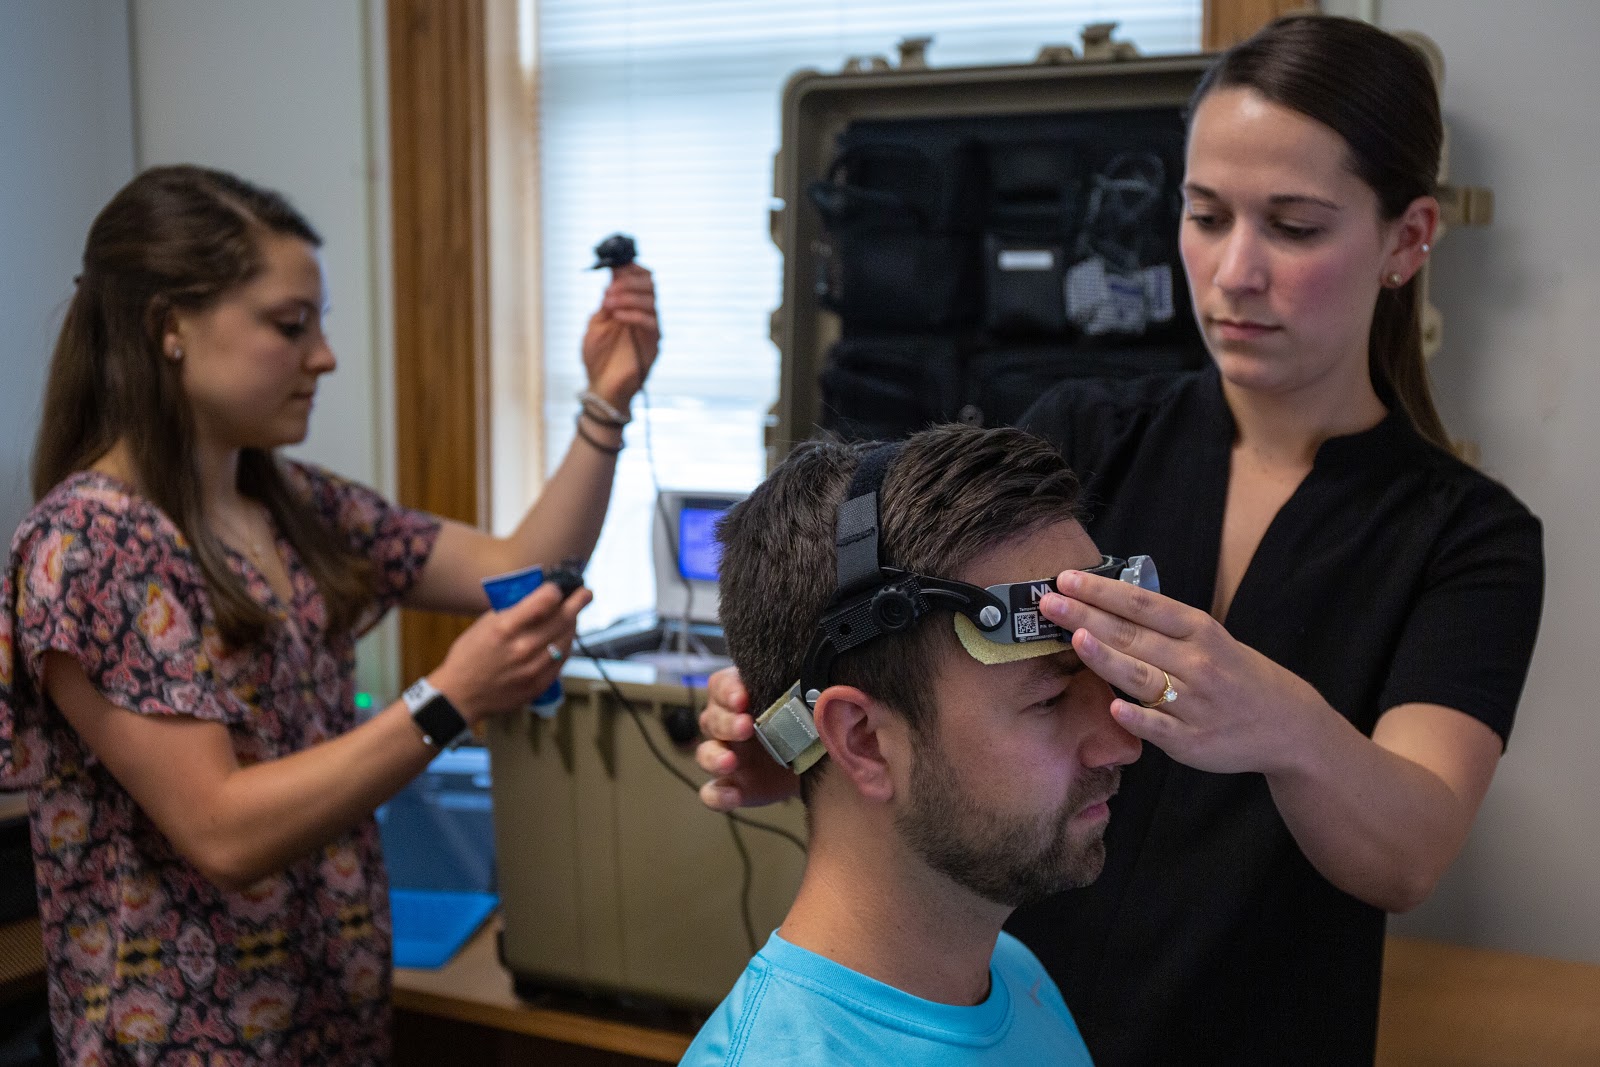 Researchers at the Gfeller Center affix an apparatus to a subject's head for concussion research